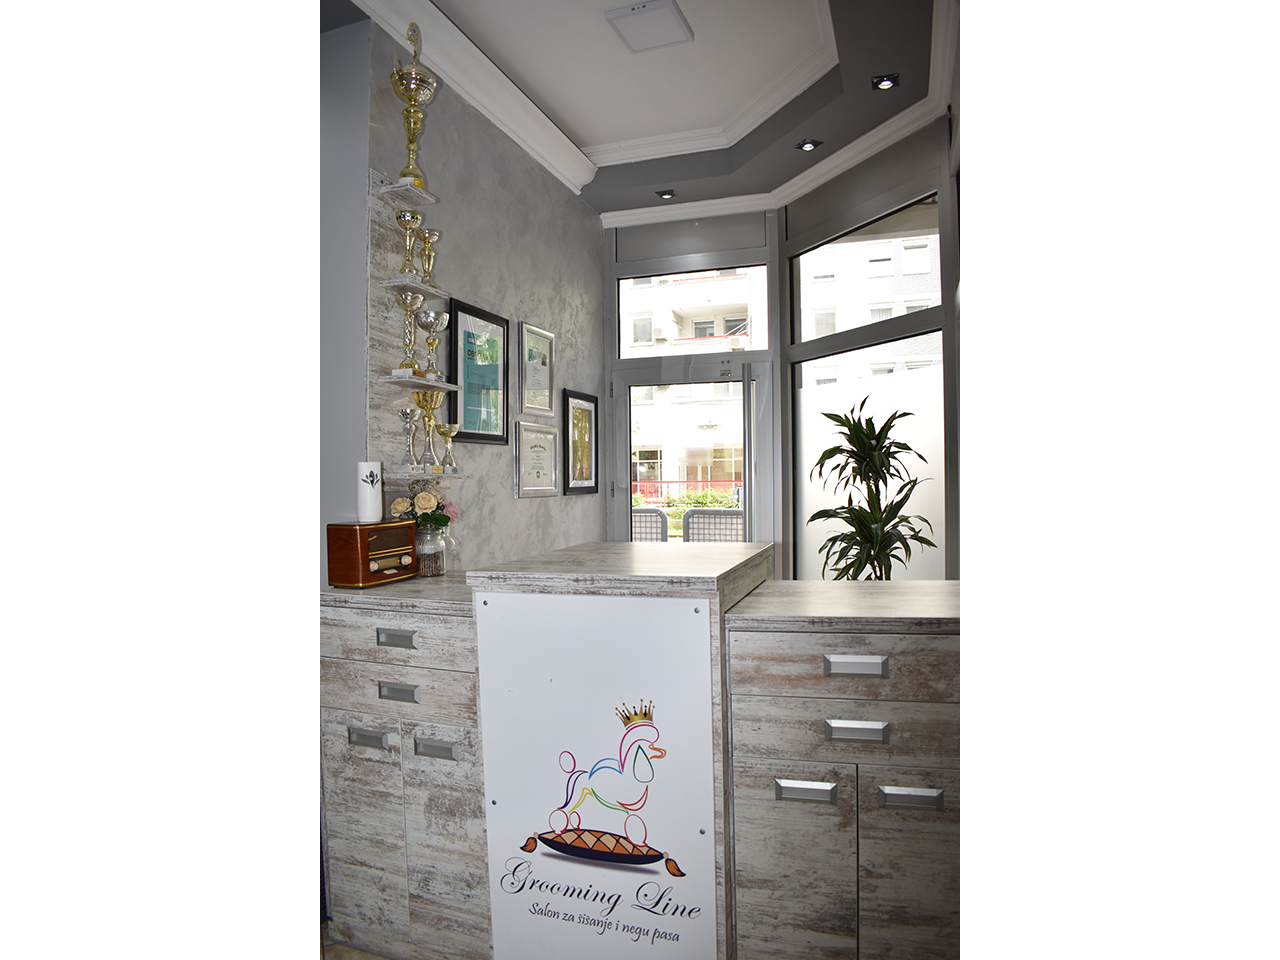 ACADEMY AND GROOMING SALON FOR DOGS GROOMING LINE Pet salon, dog grooming Beograd